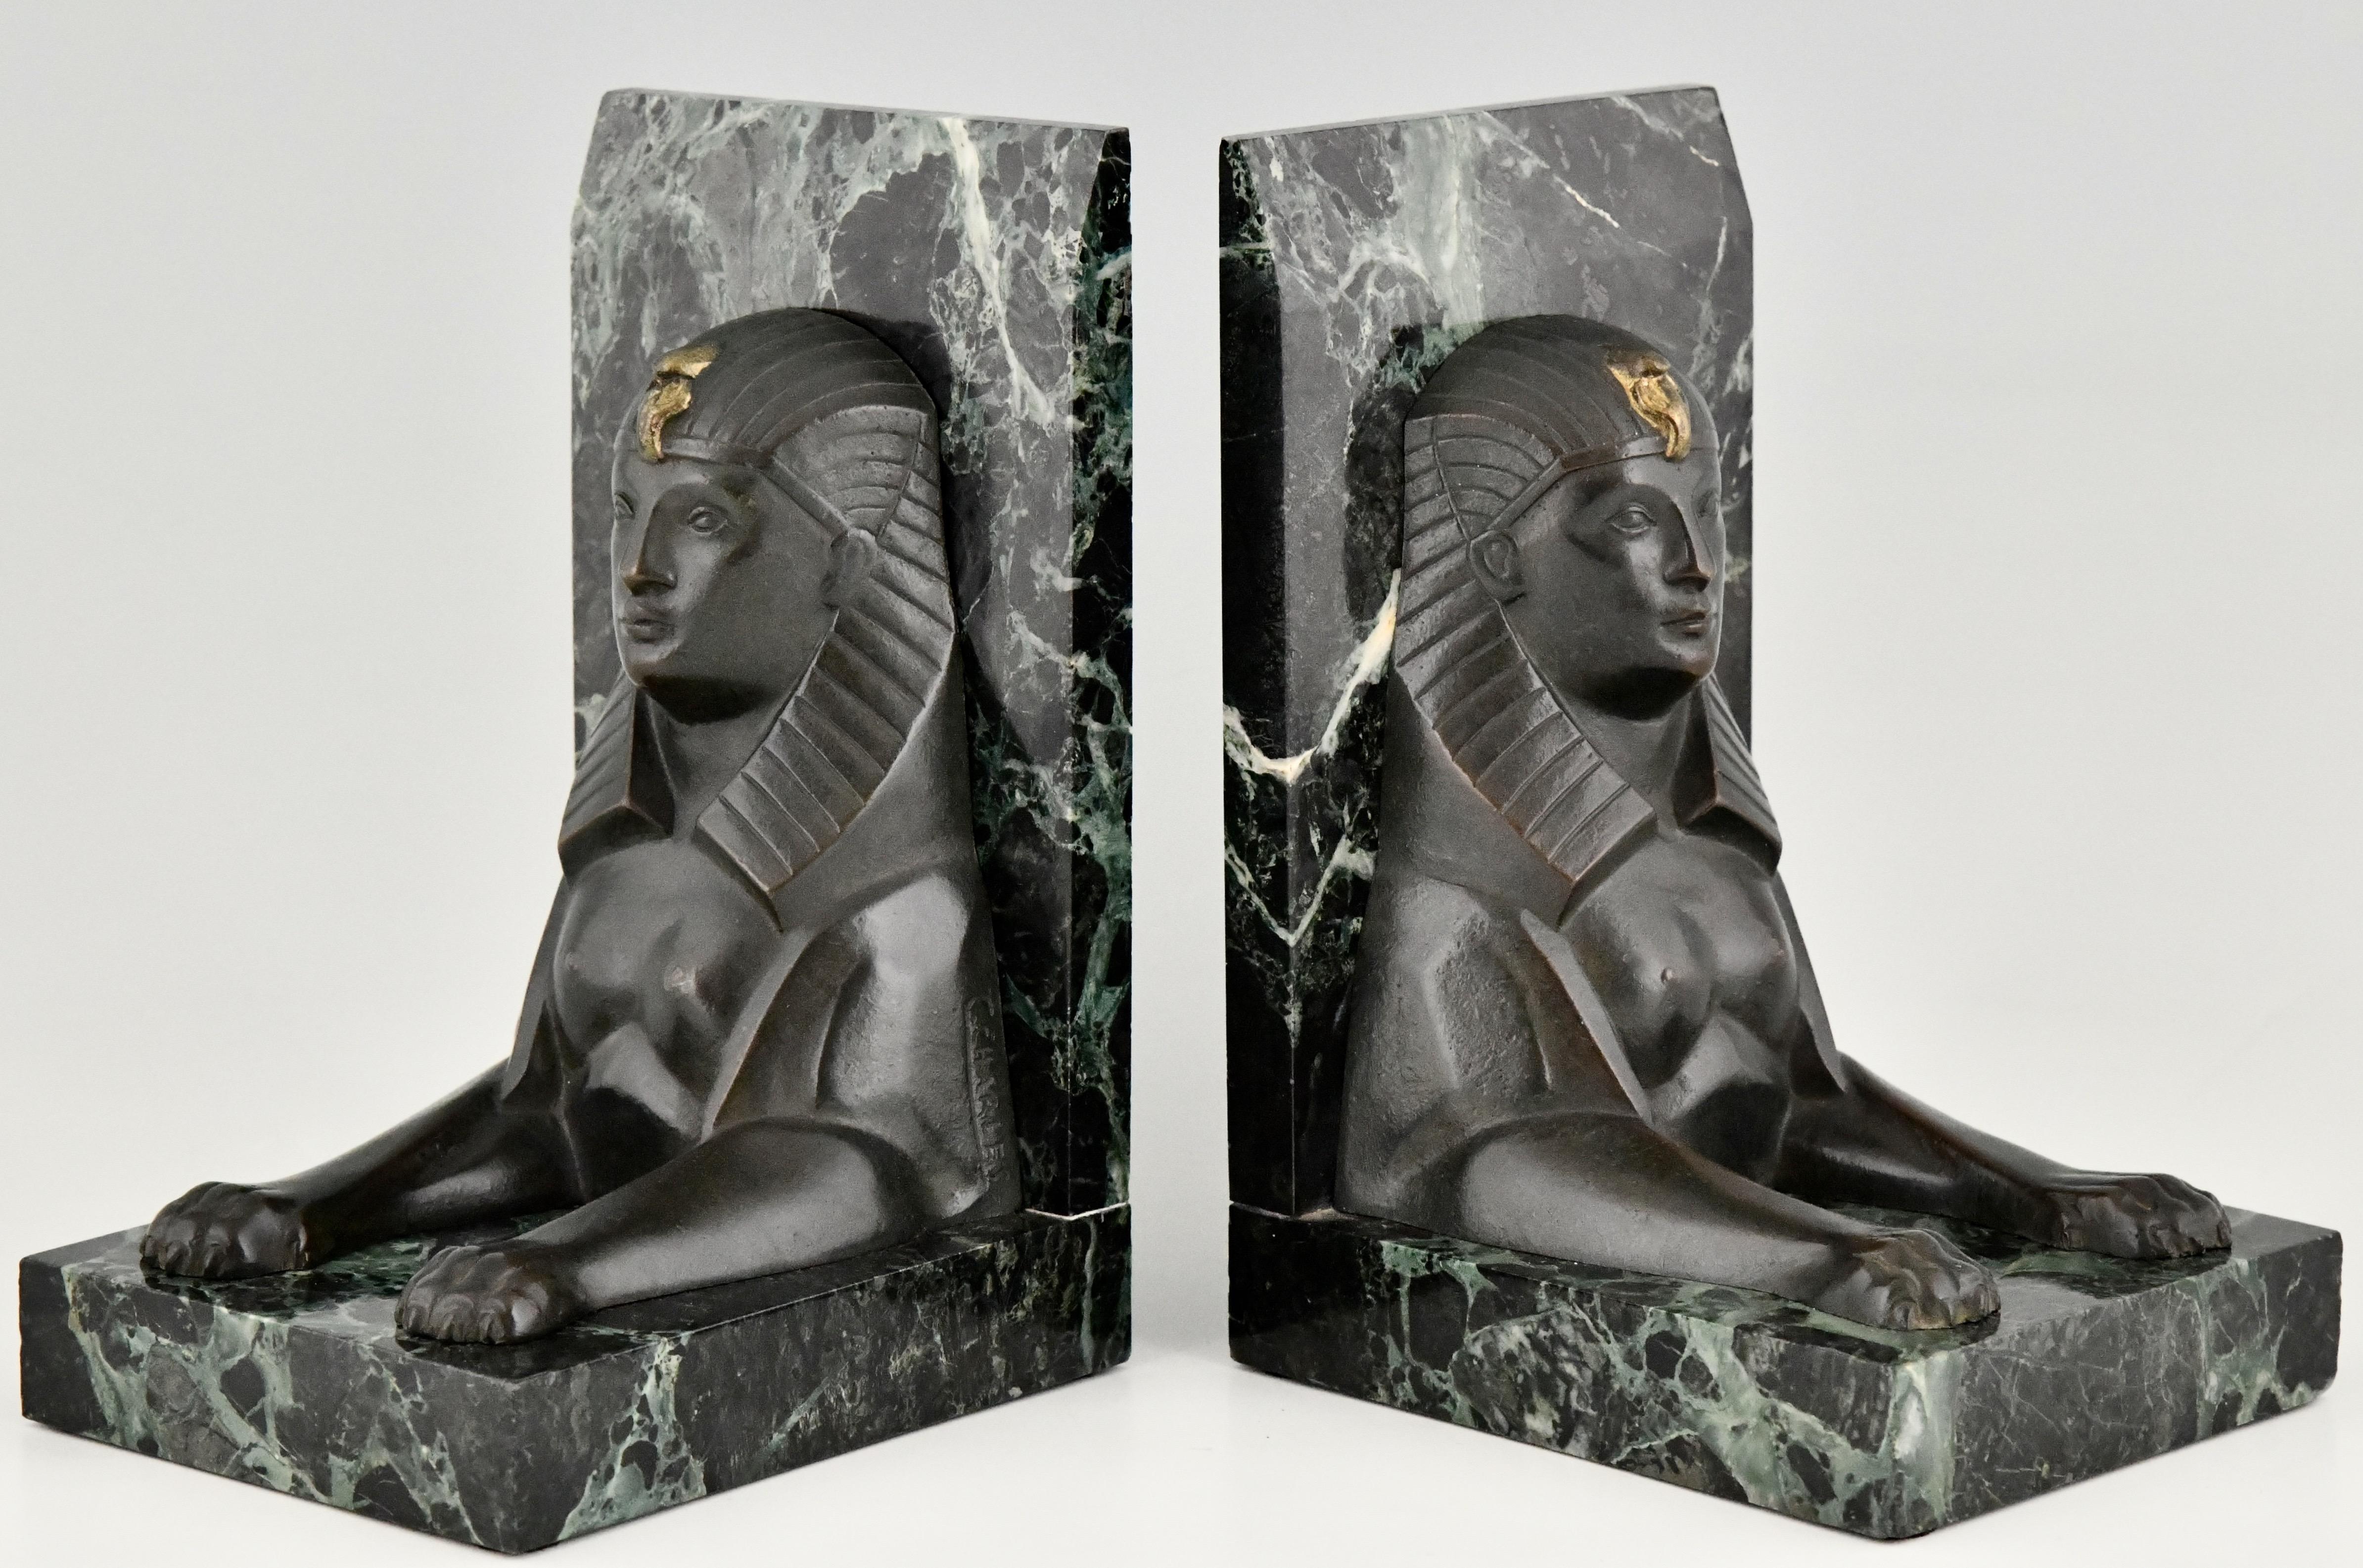 Pair of Art Deco bronze sphynx bookends on green marble bases, signed by C. Charles. France 1930
Literature:
“The dictionary of sculptors in bronze” by James Mackay. Antique collectors club.?“Dictionnaire des peintres,sculpteurs,dessinateurs et